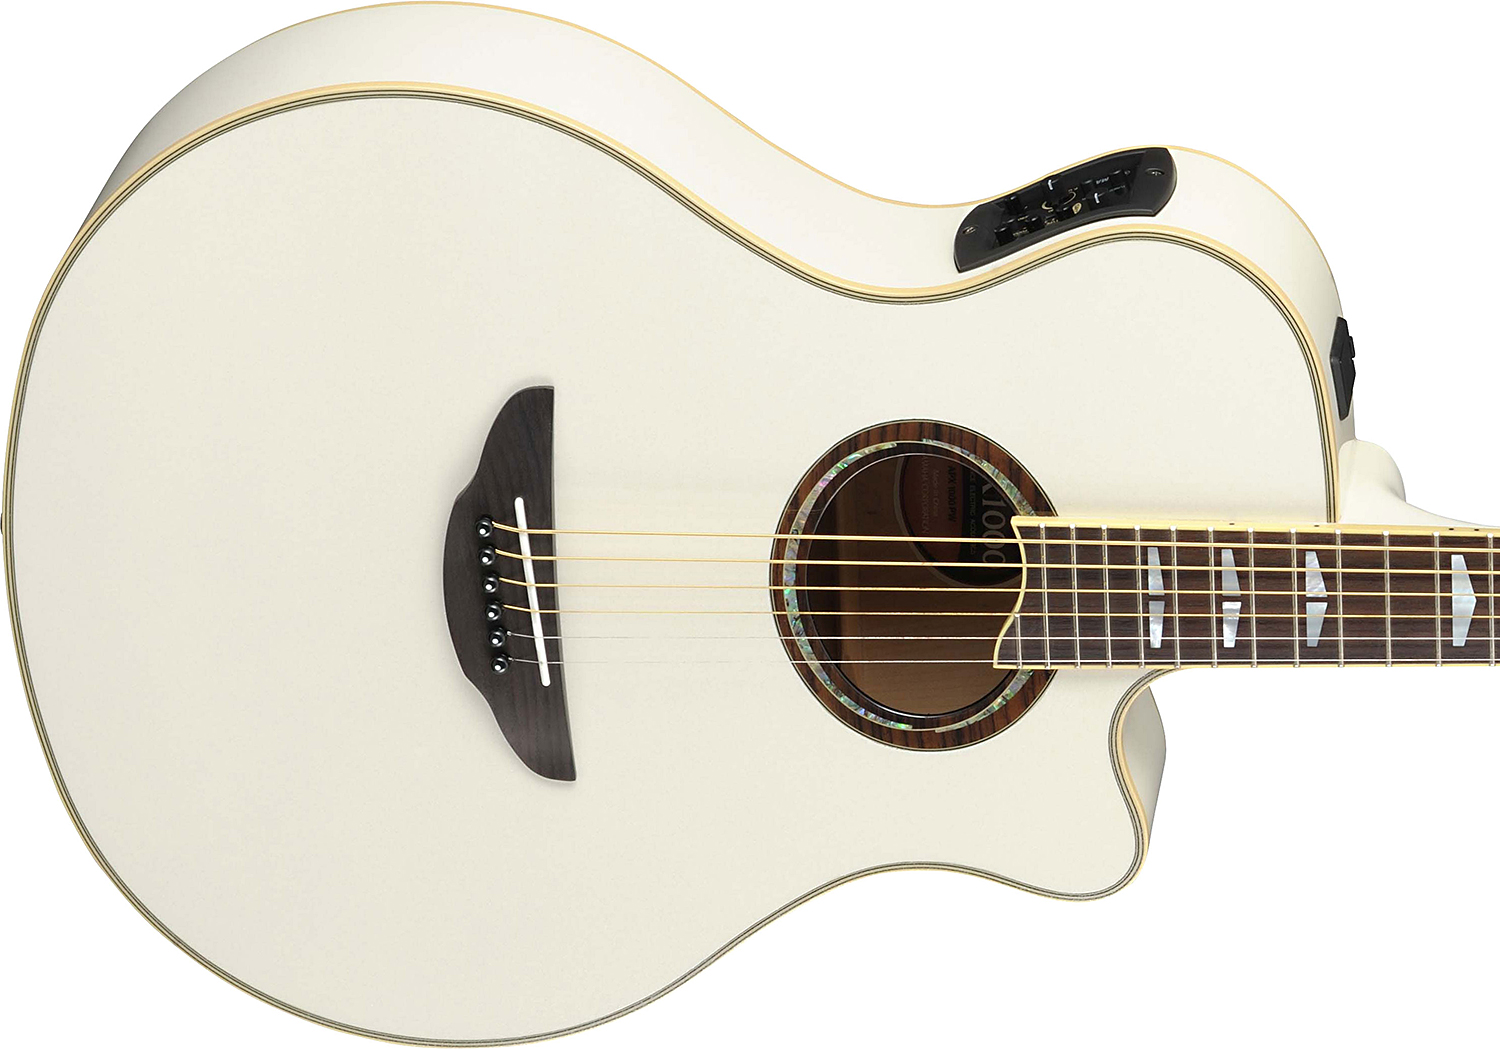 Yamaha Apx1000 Pearl White - Pearl White - Guitarra electro acustica - Variation 2